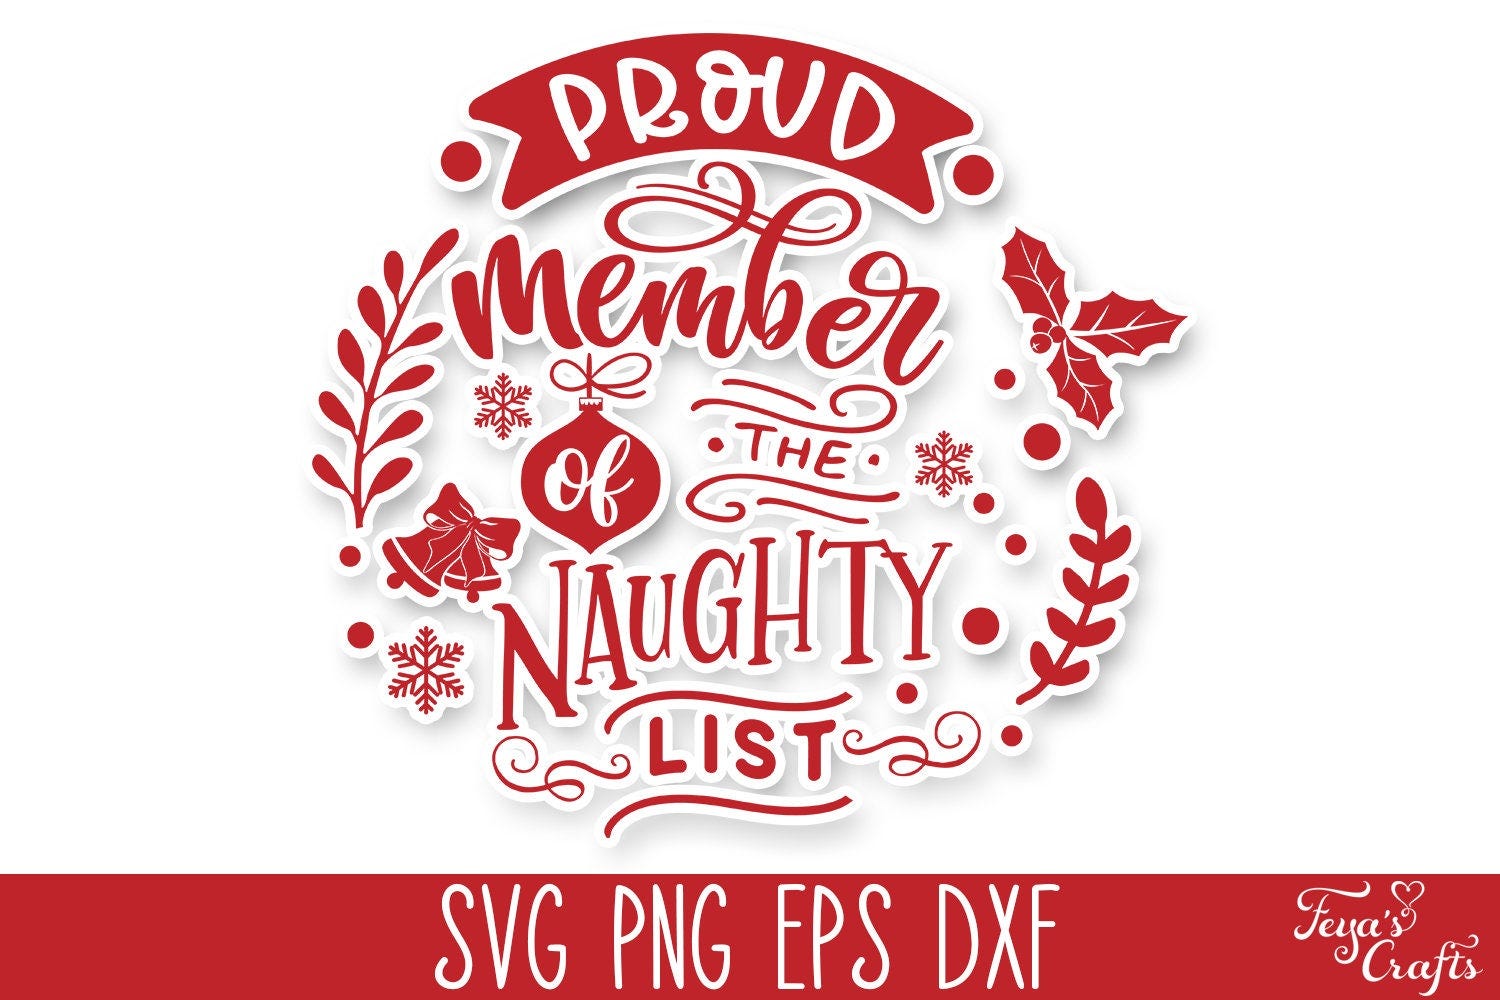 Proud Member of the Naughty List - Round Christmas SVG, Wood Sign Christmas SVG, Christmas Svg Cricut, Naughty Christmas SVG